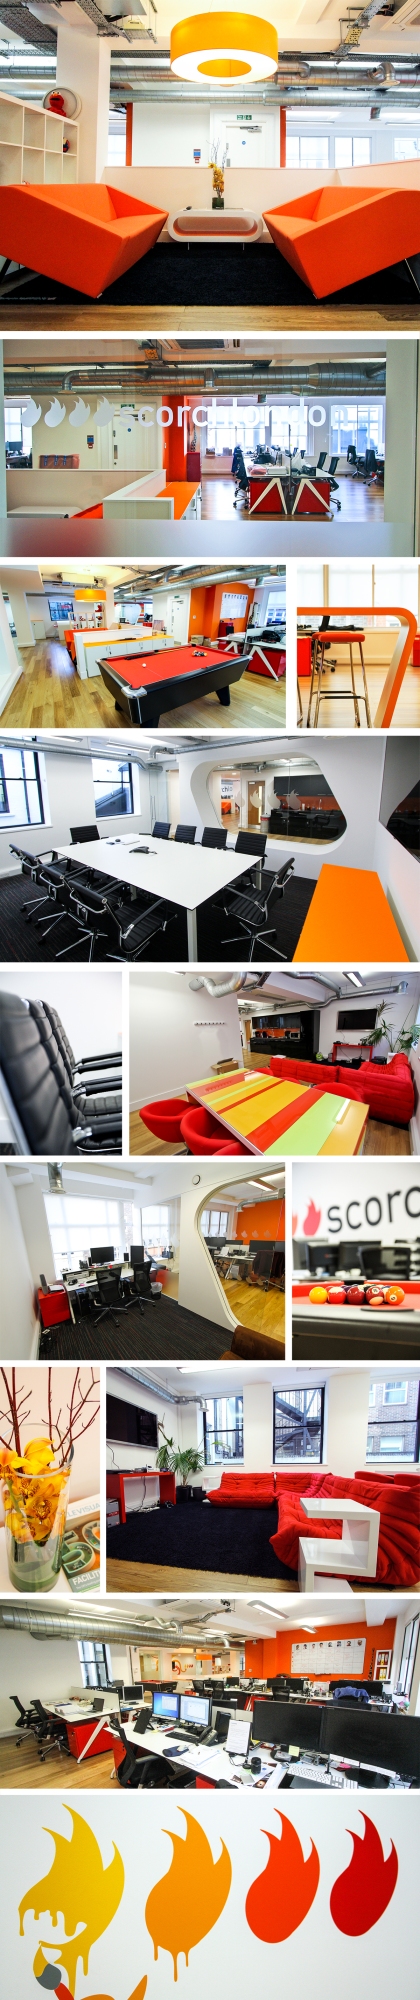 Scorch London's new offices in Frith Street